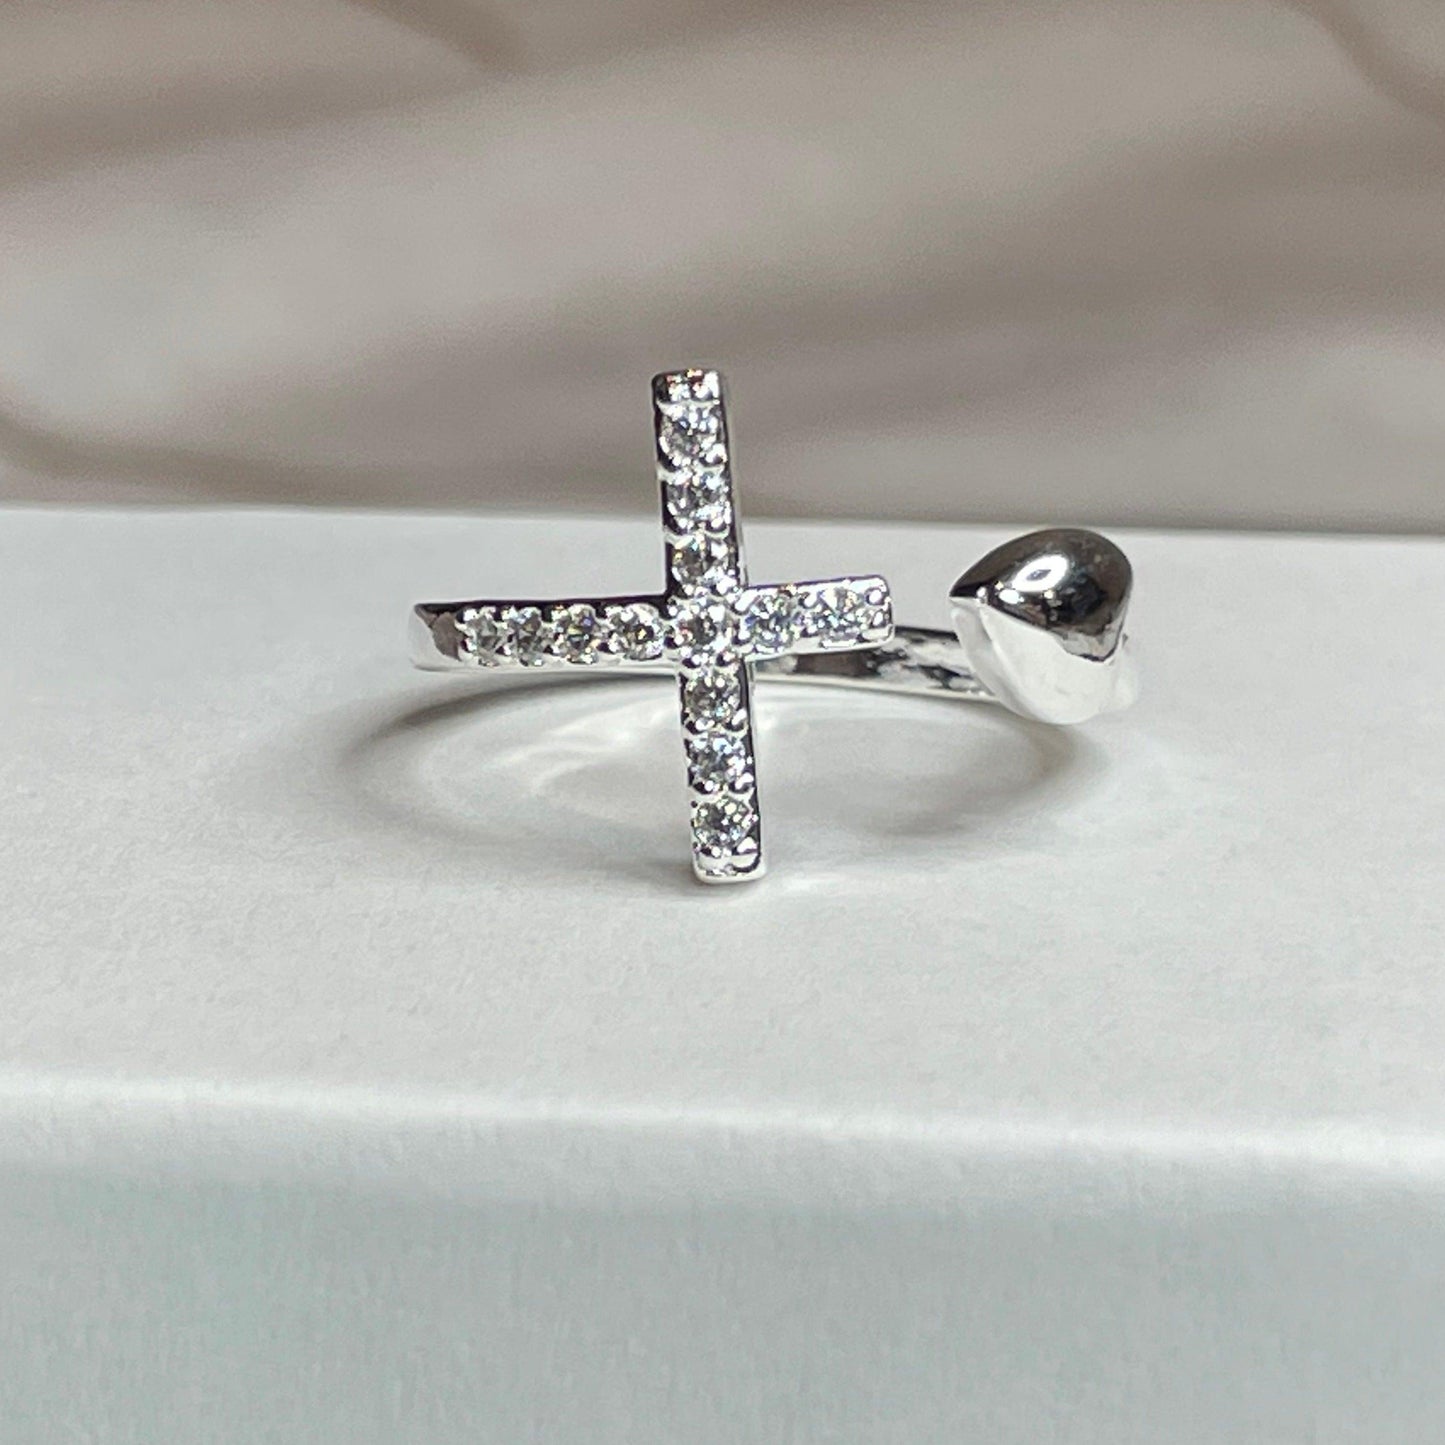 Adjustable Cross and Heart Ring